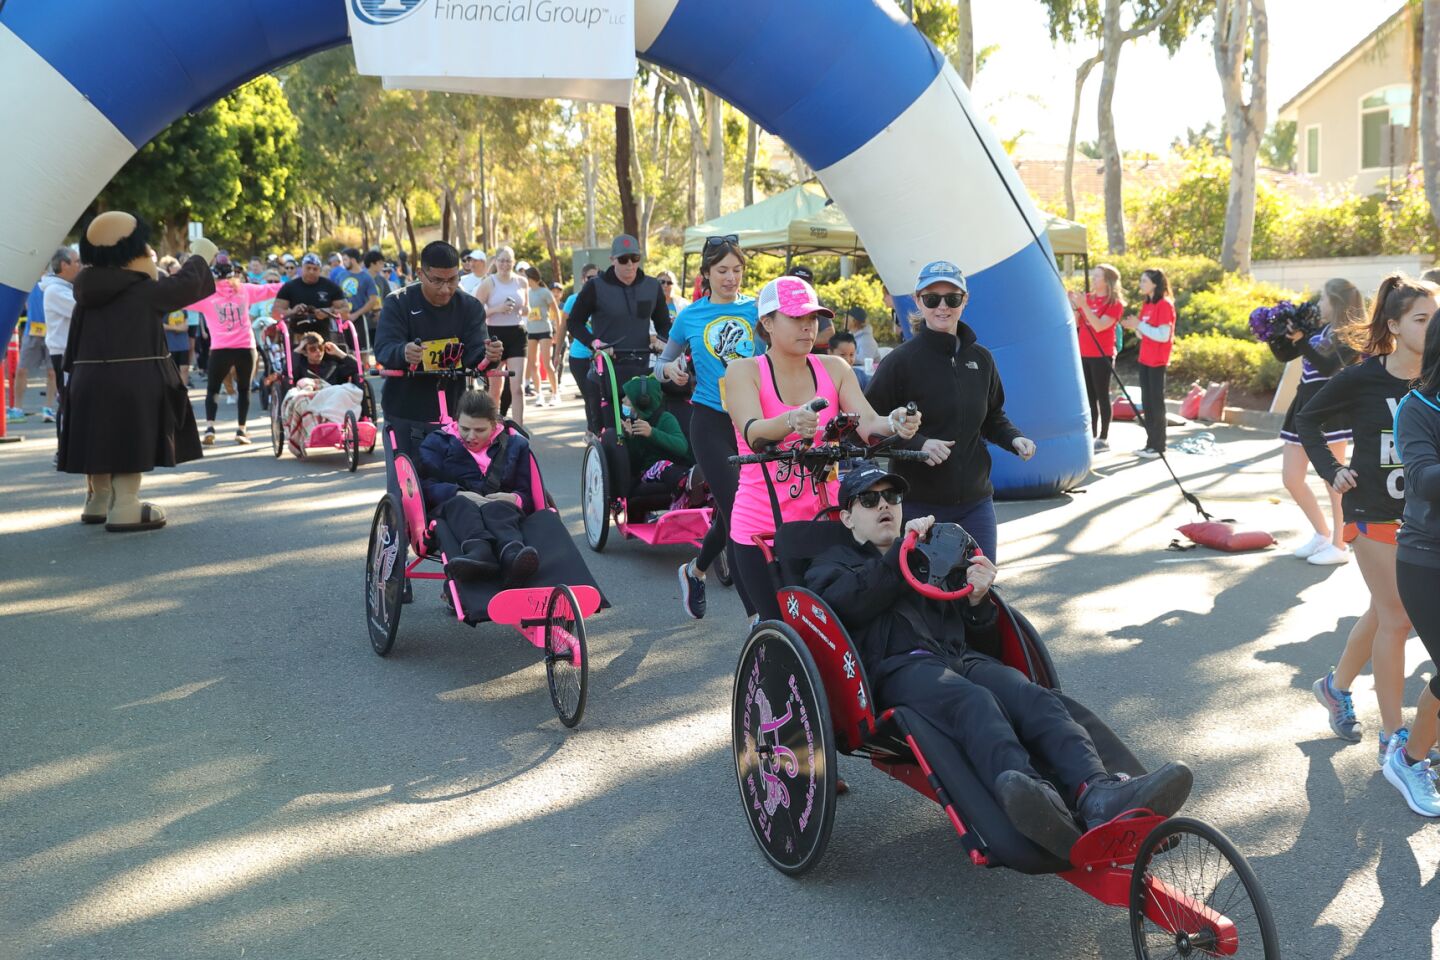 The annual Mitchell Thorpe Foundation 5K at Poinsettia Community Park in Carlsbad